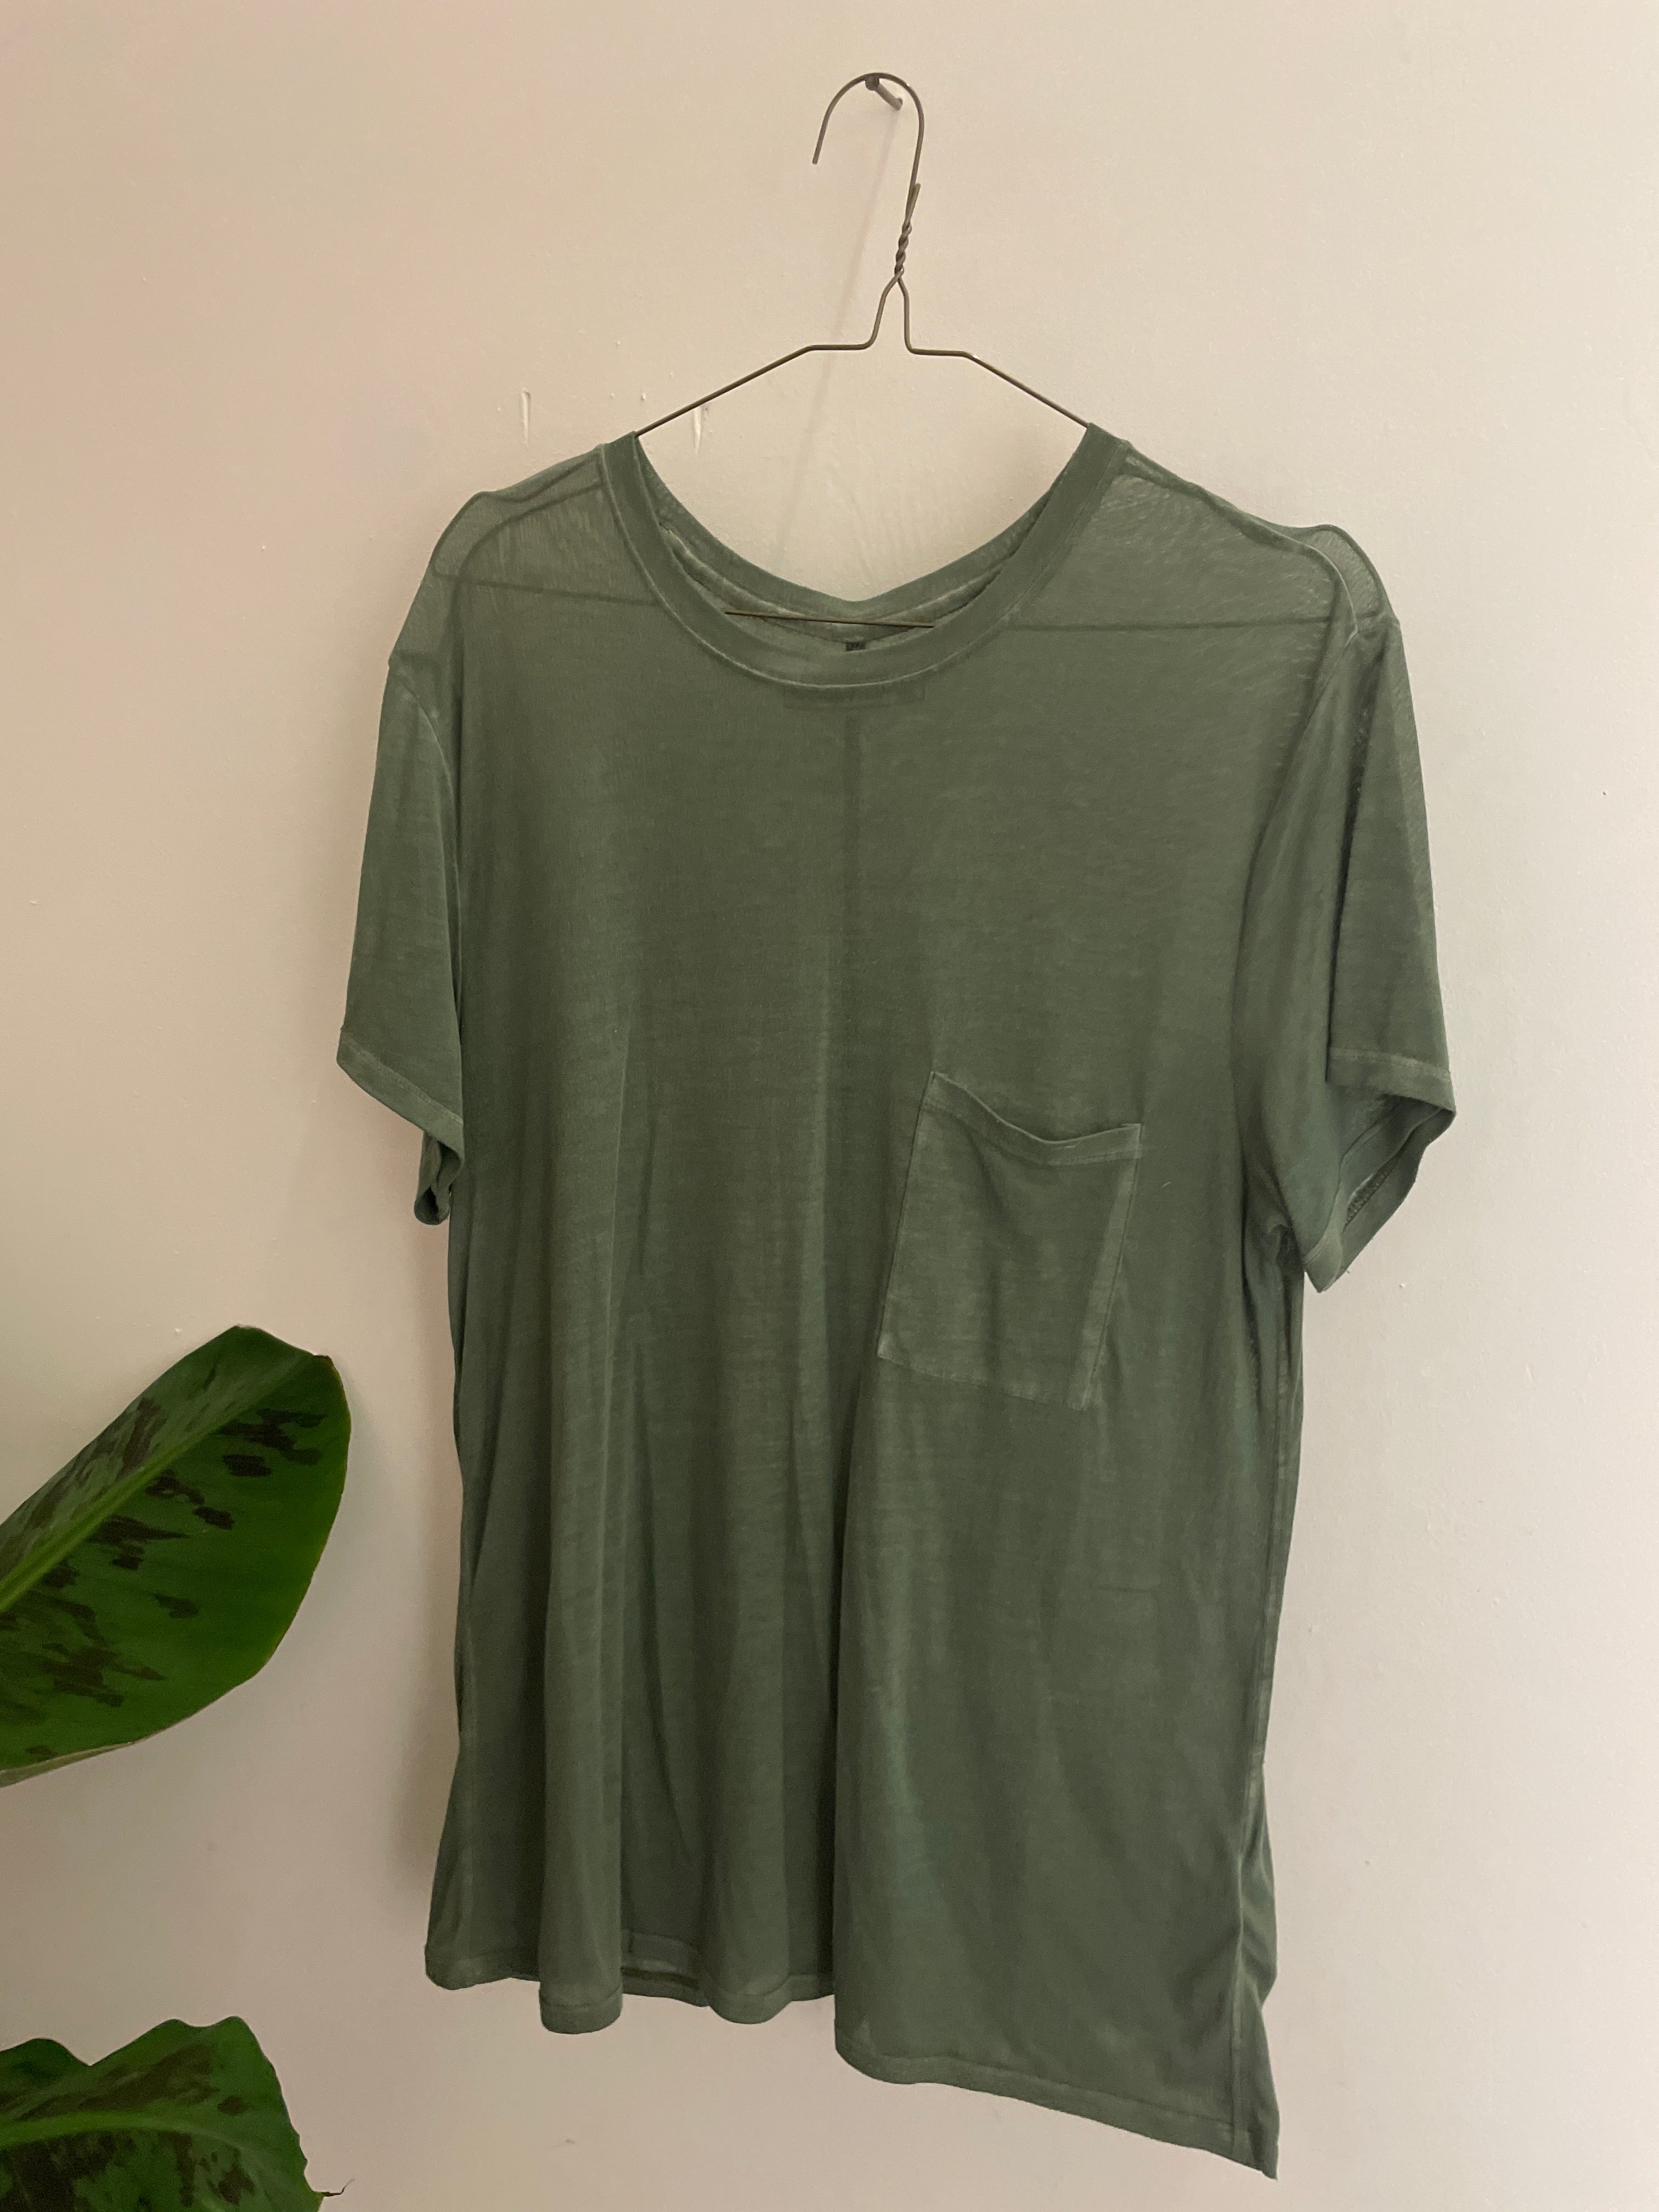 Vintage green abercrombie & fitch tshirt size S